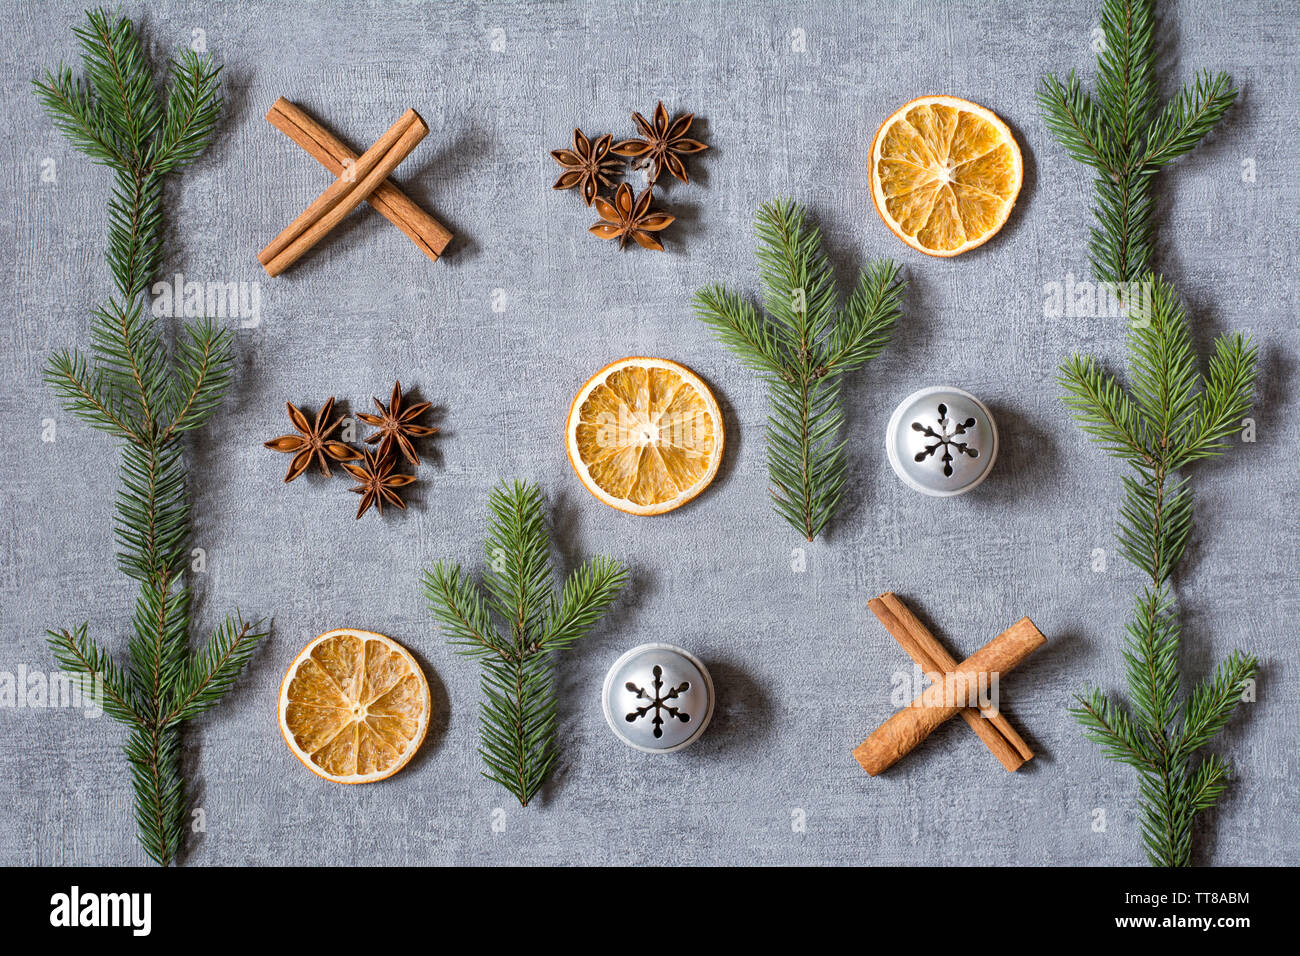 Christmas noughts and crosses deco with dried oranges, aniseeds, cinamon sticks, fir tree branches and silver bells on grey background Stock Photo